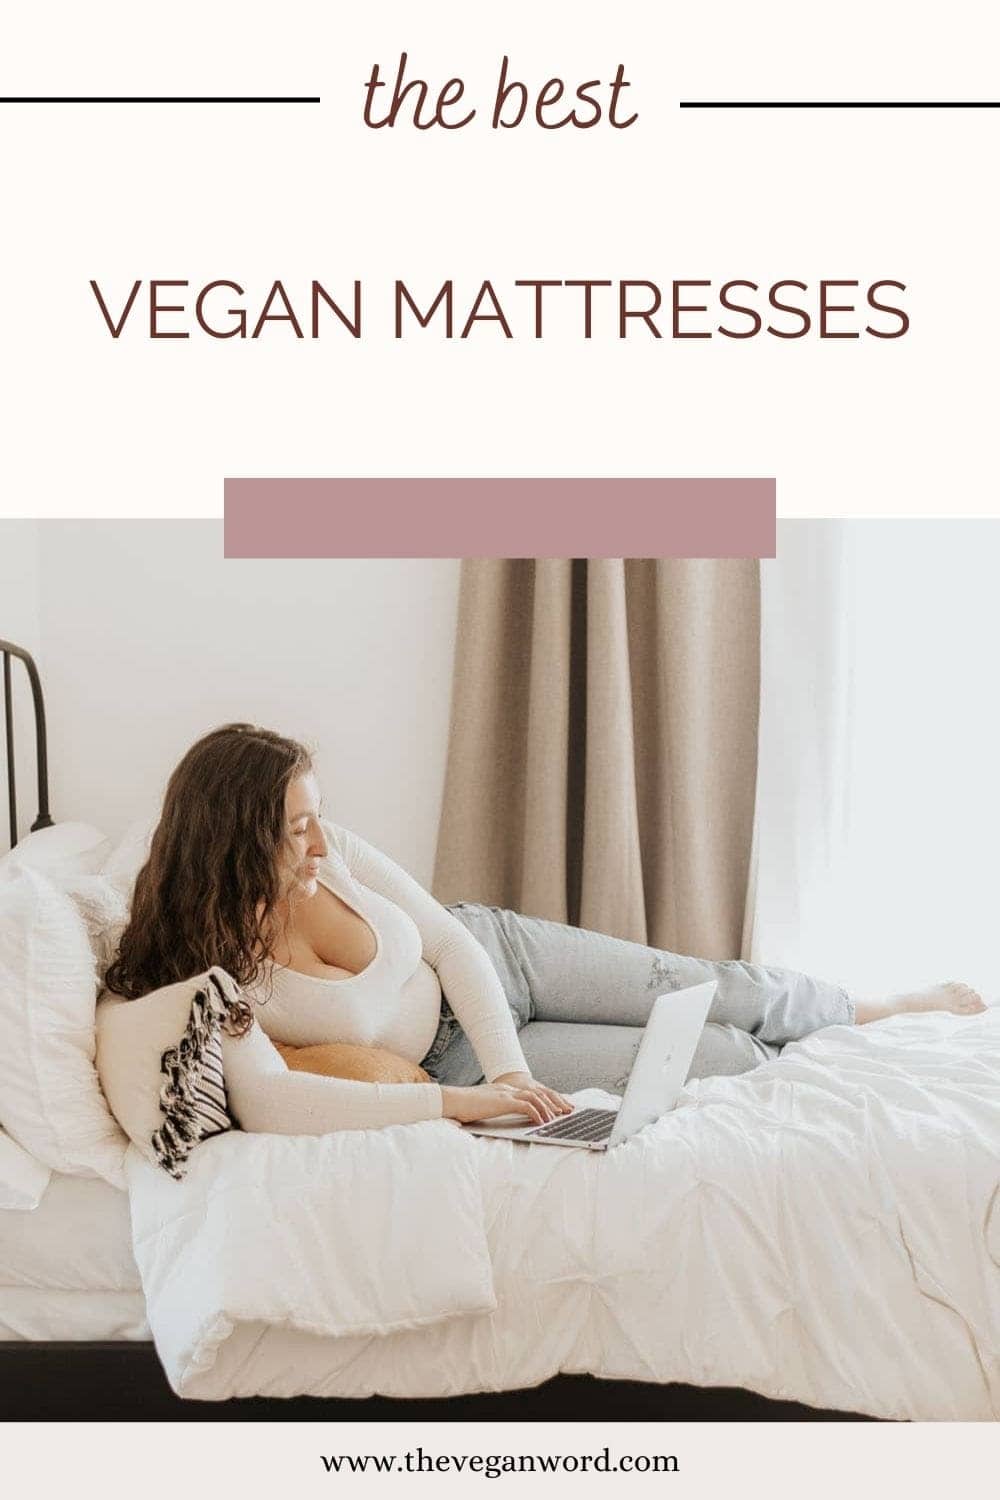 Looking for a vegan mattress? Click here to see the best wool- and feather-free vegan options